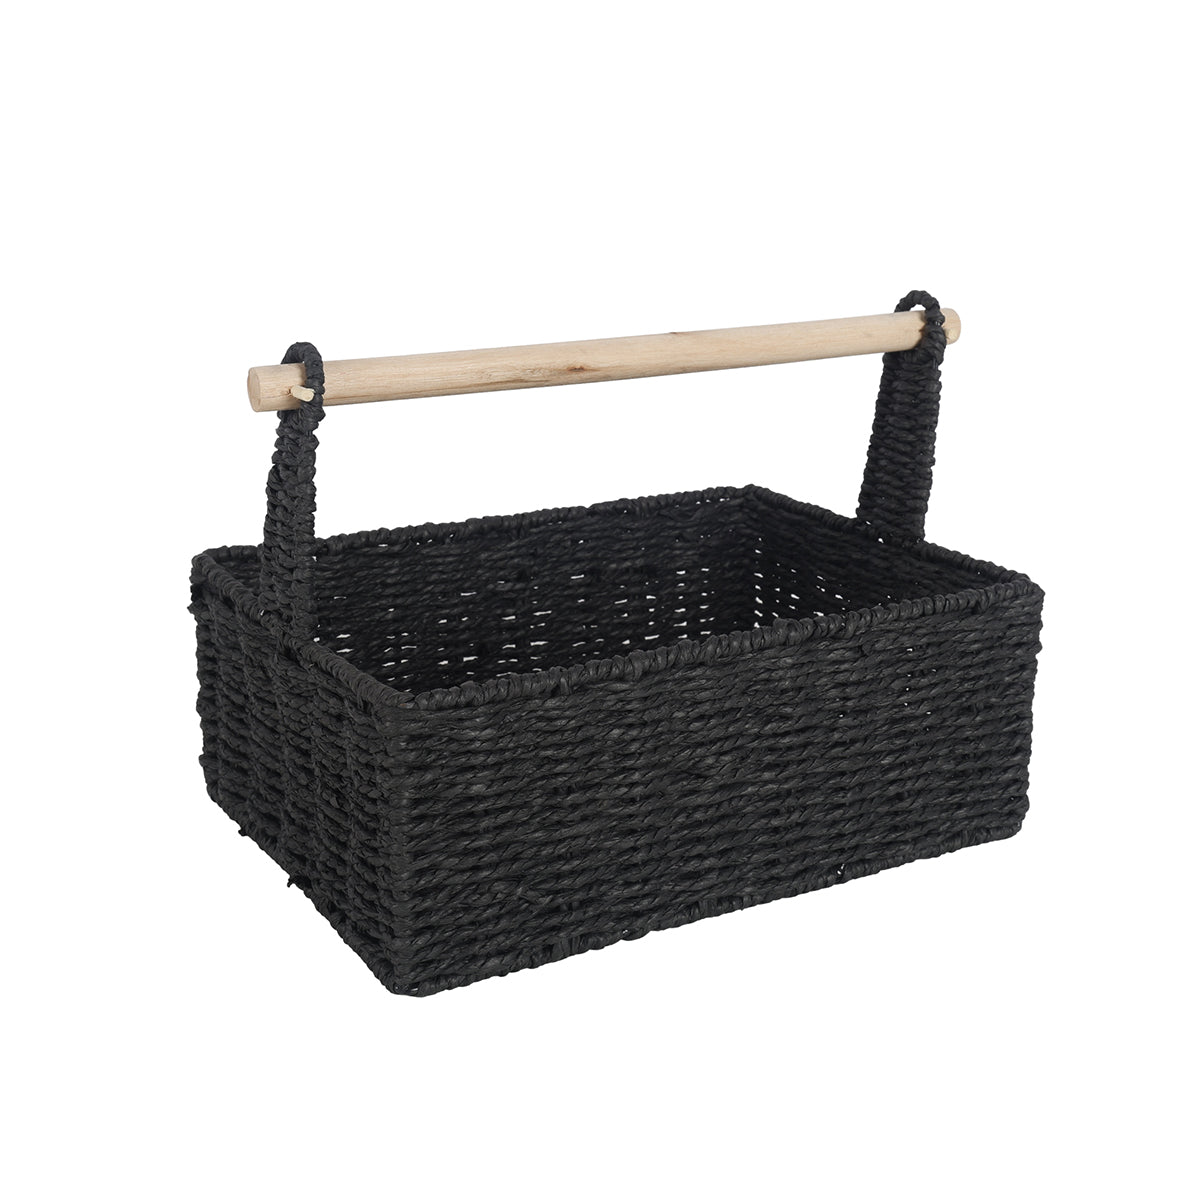 Cercy Paper Rope Organiser Black With Wooden Handle 30 x 24 x 22cm